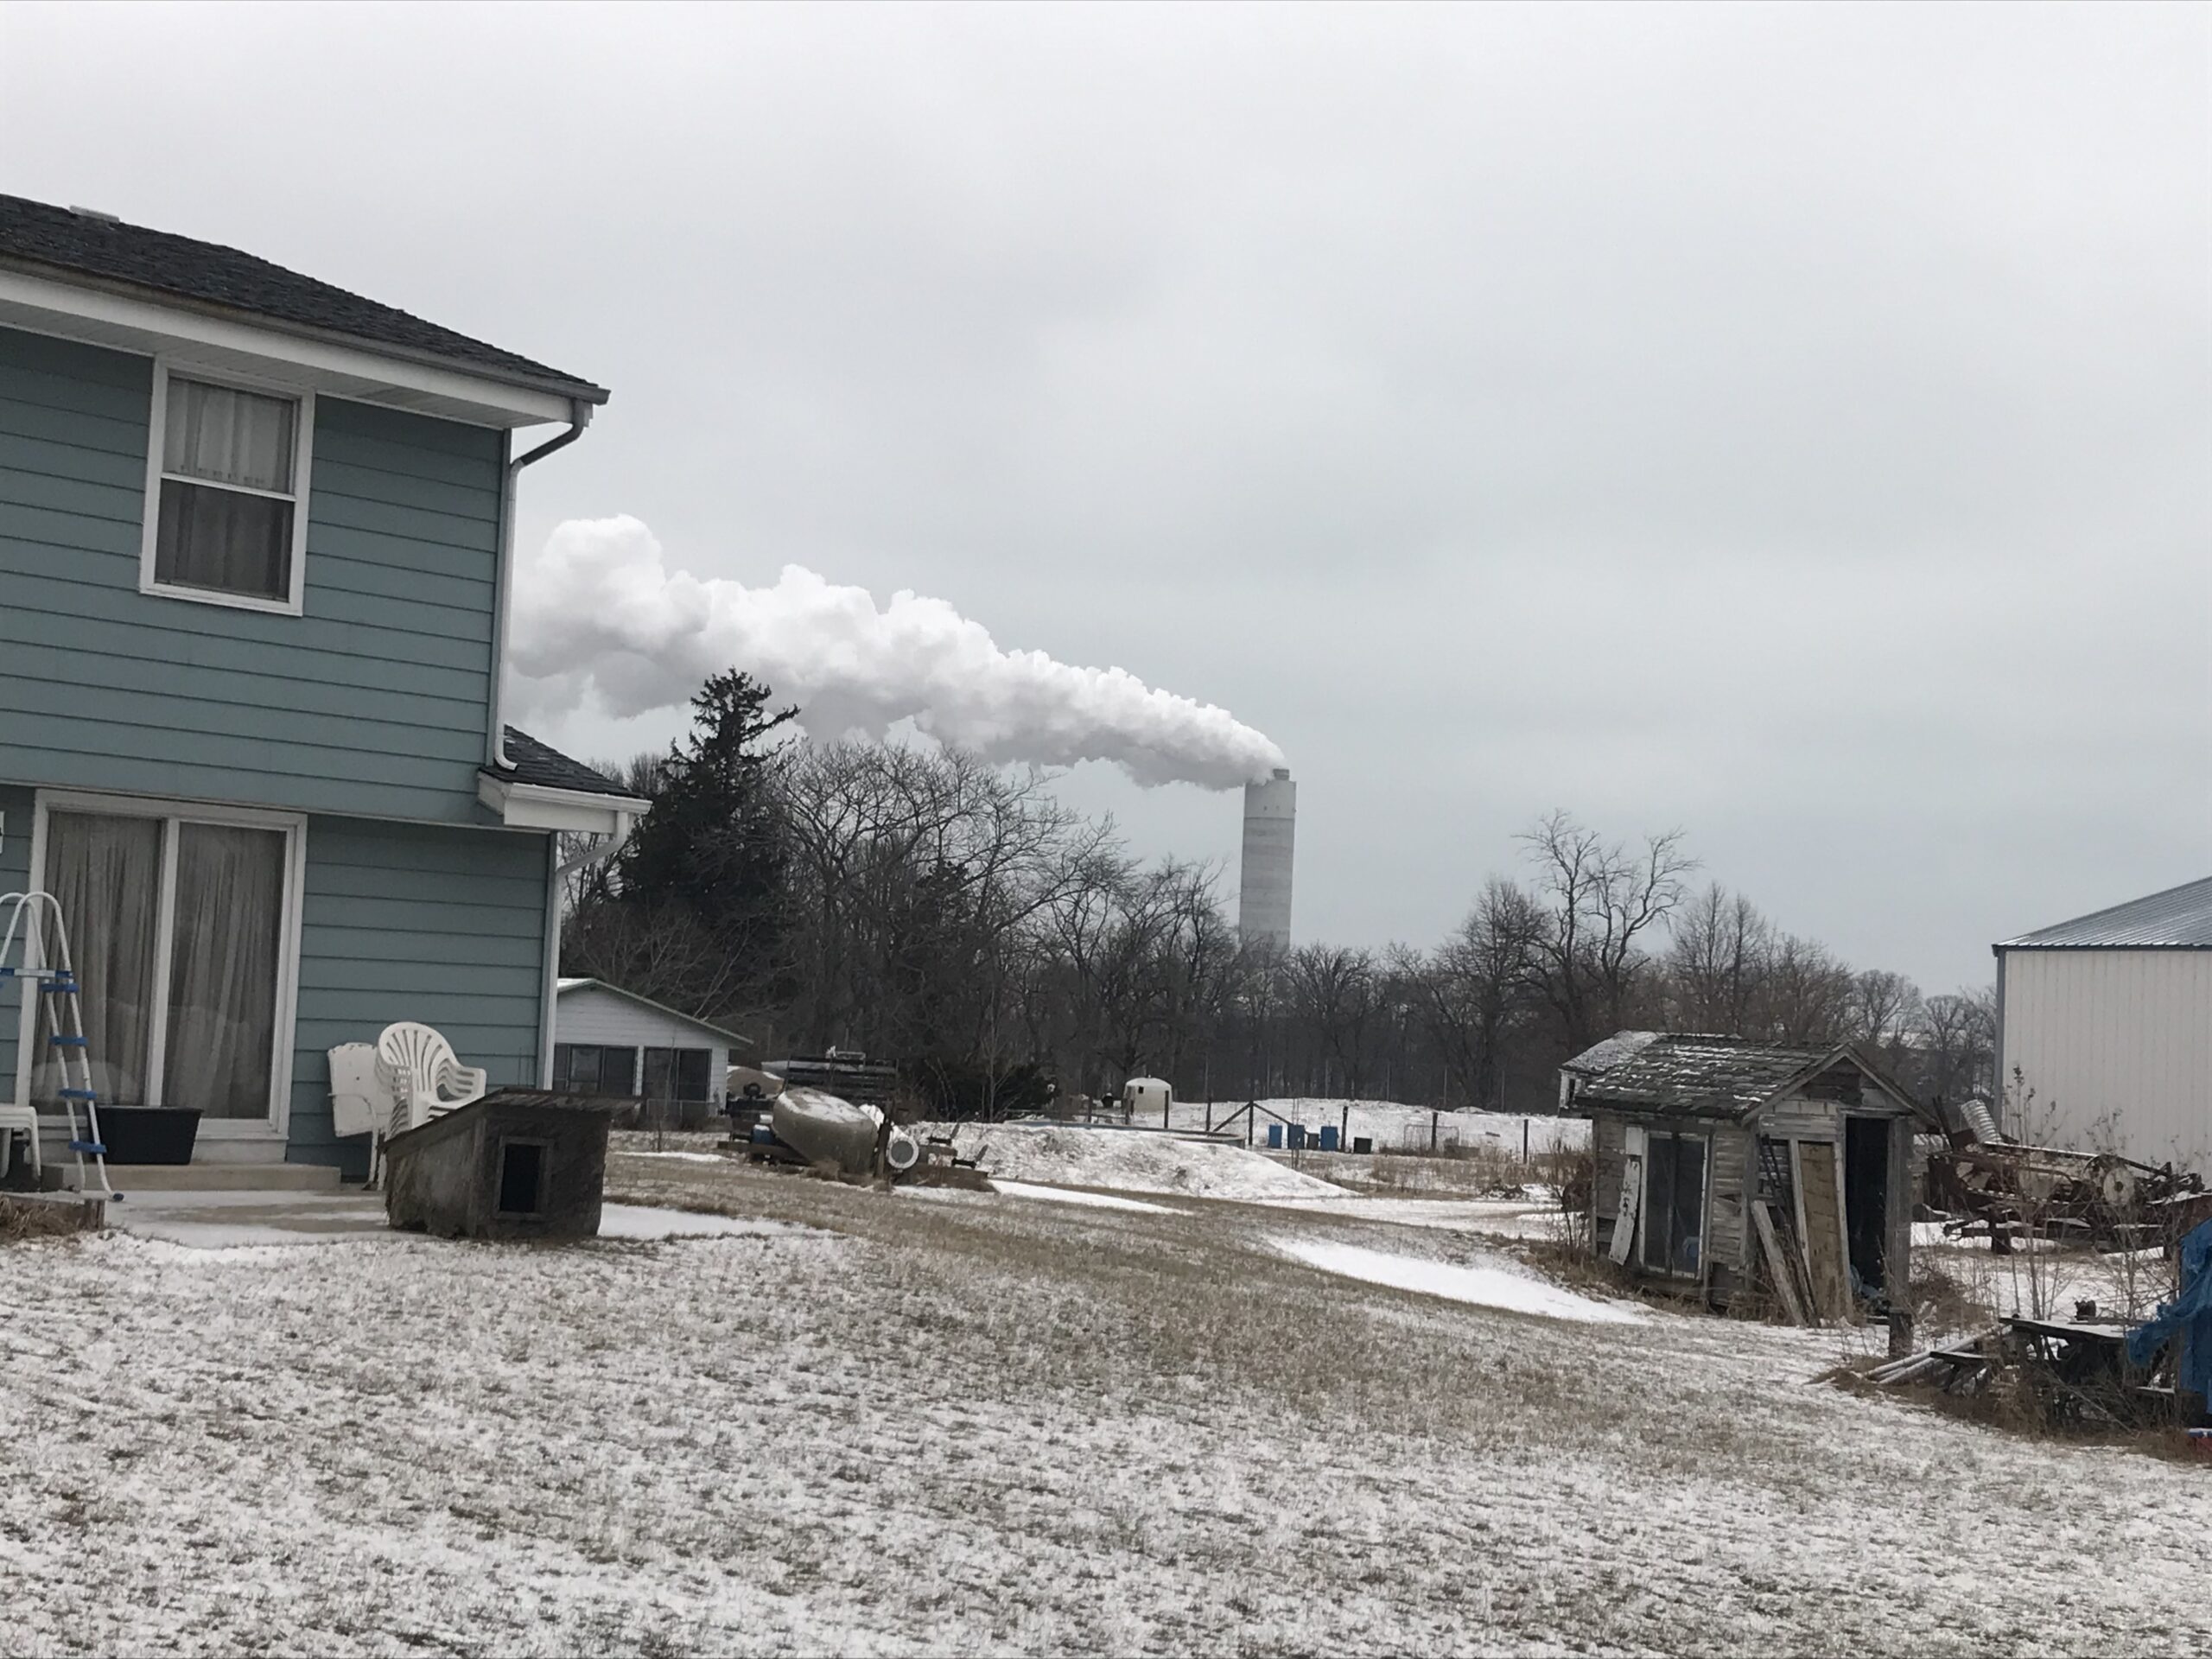 A power plant in the distance behind a house